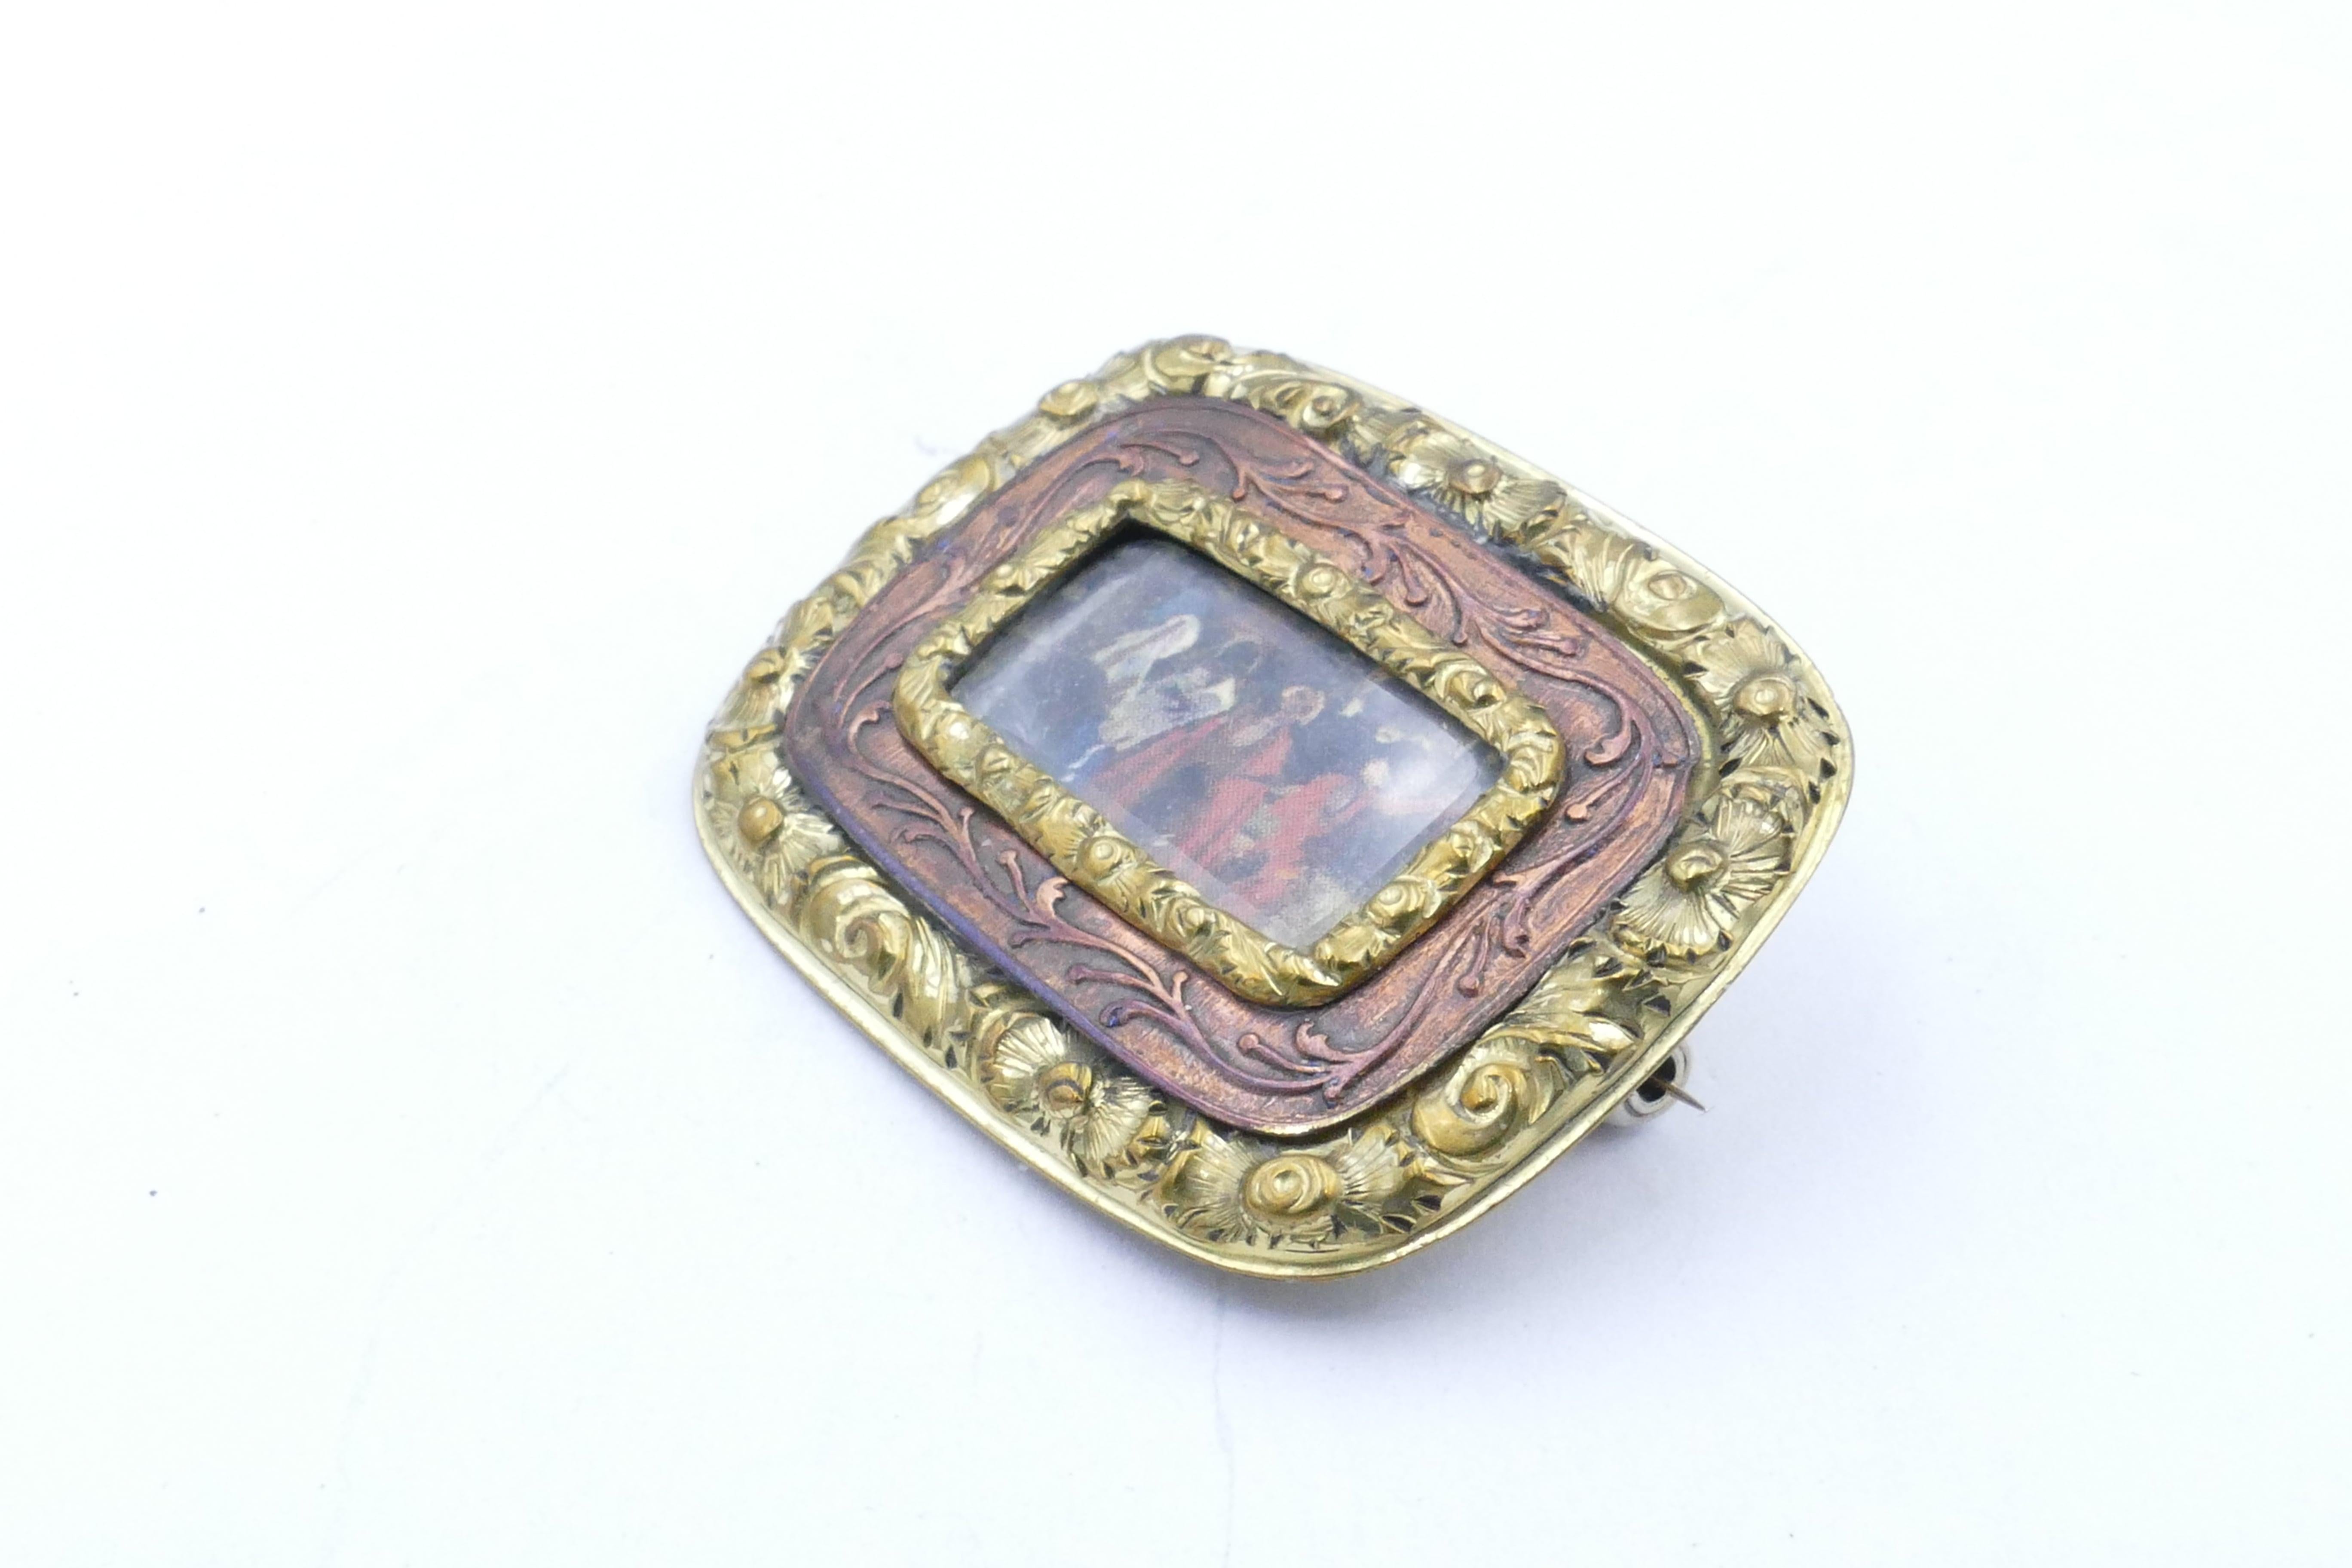 A great Find was this 1840's - 1860's Portrait Brooch.
Fashioned from 15ct Yellow Gold with Copper as well its centre is a miniature portrait scene with the Yellow Gold Border having embossed filigree, foliate & scrolling motifs.
The rear of the